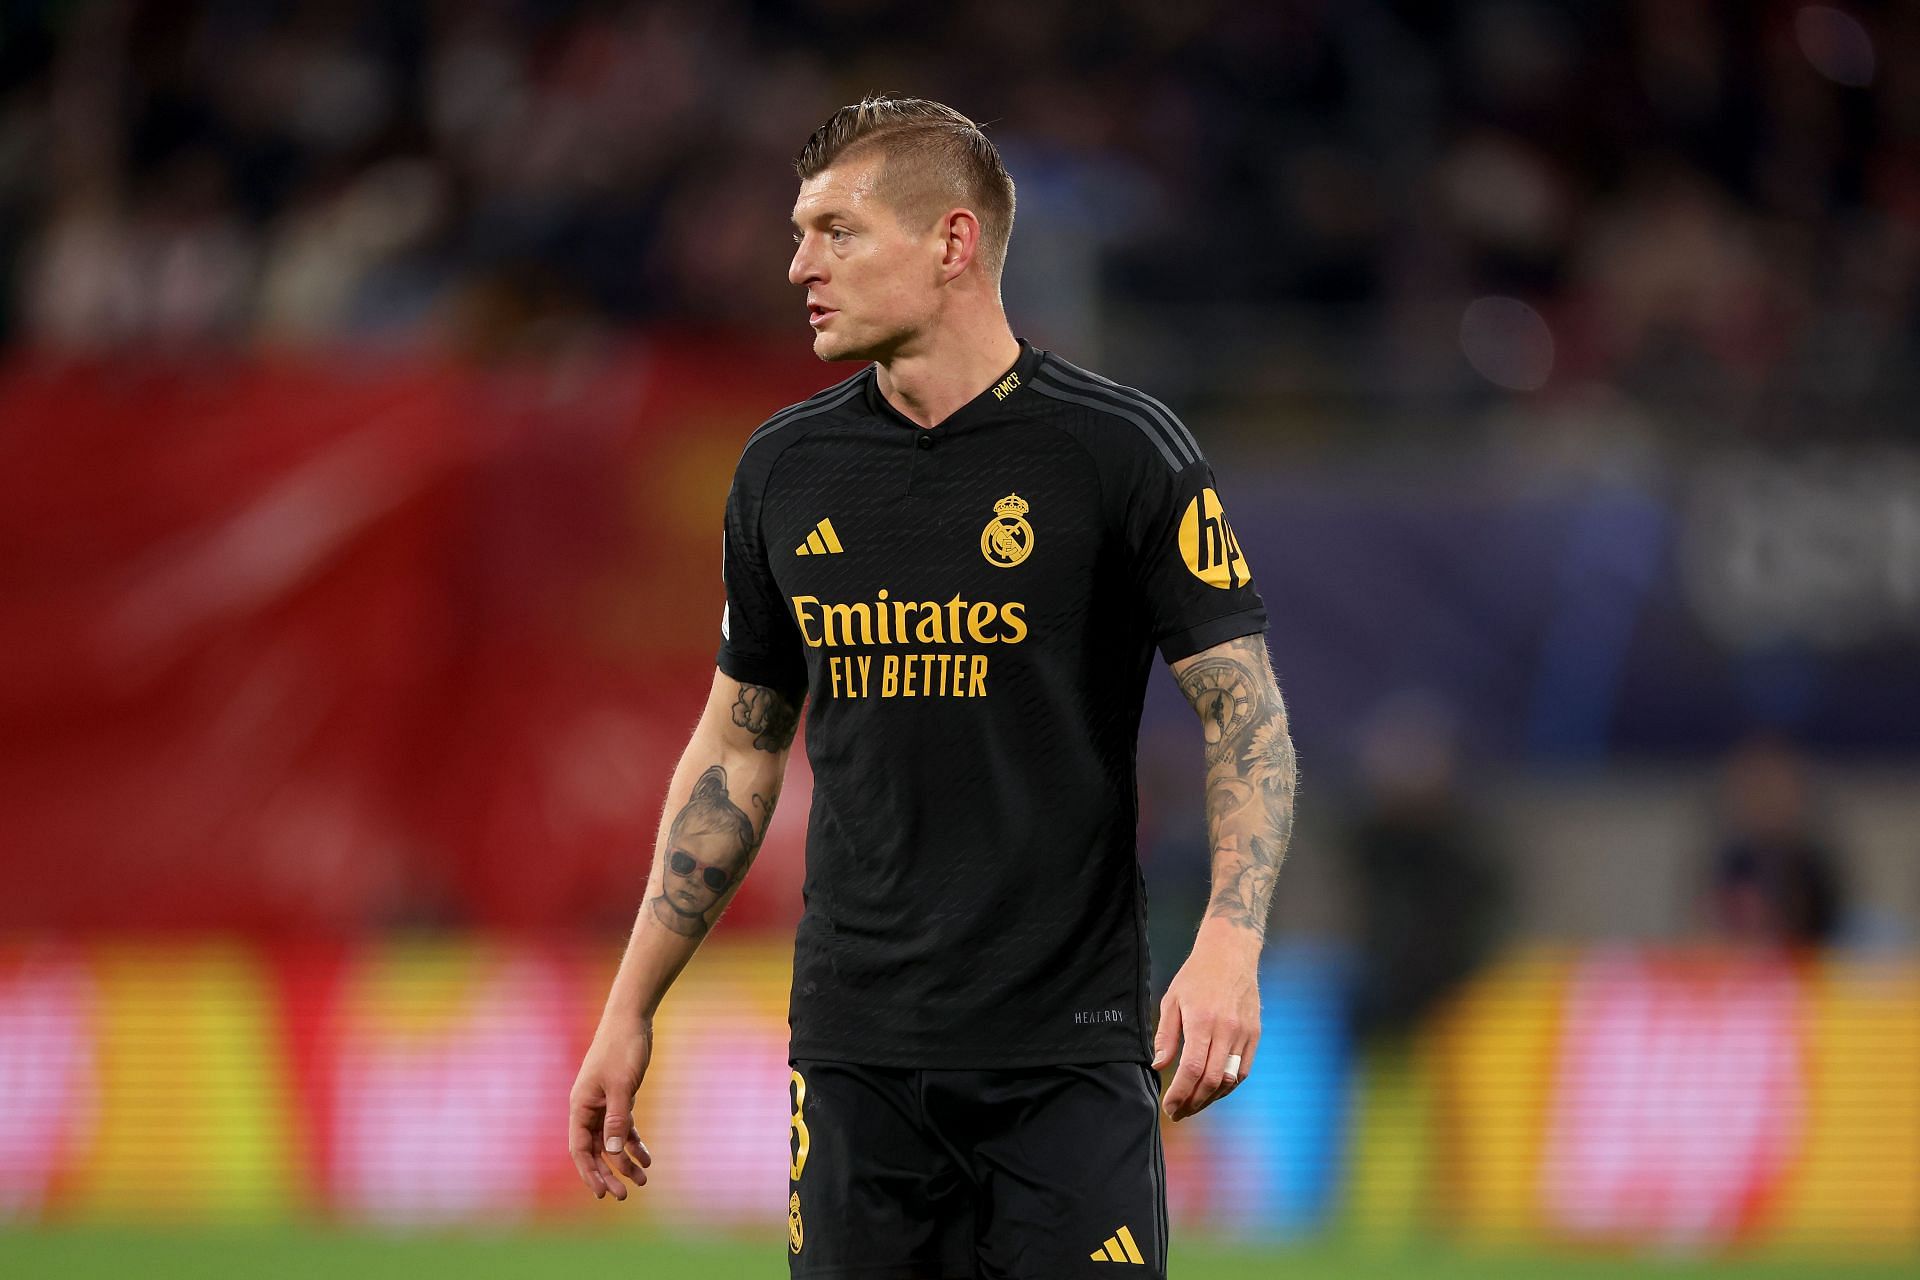 Toni Kroos is back from international retirement.